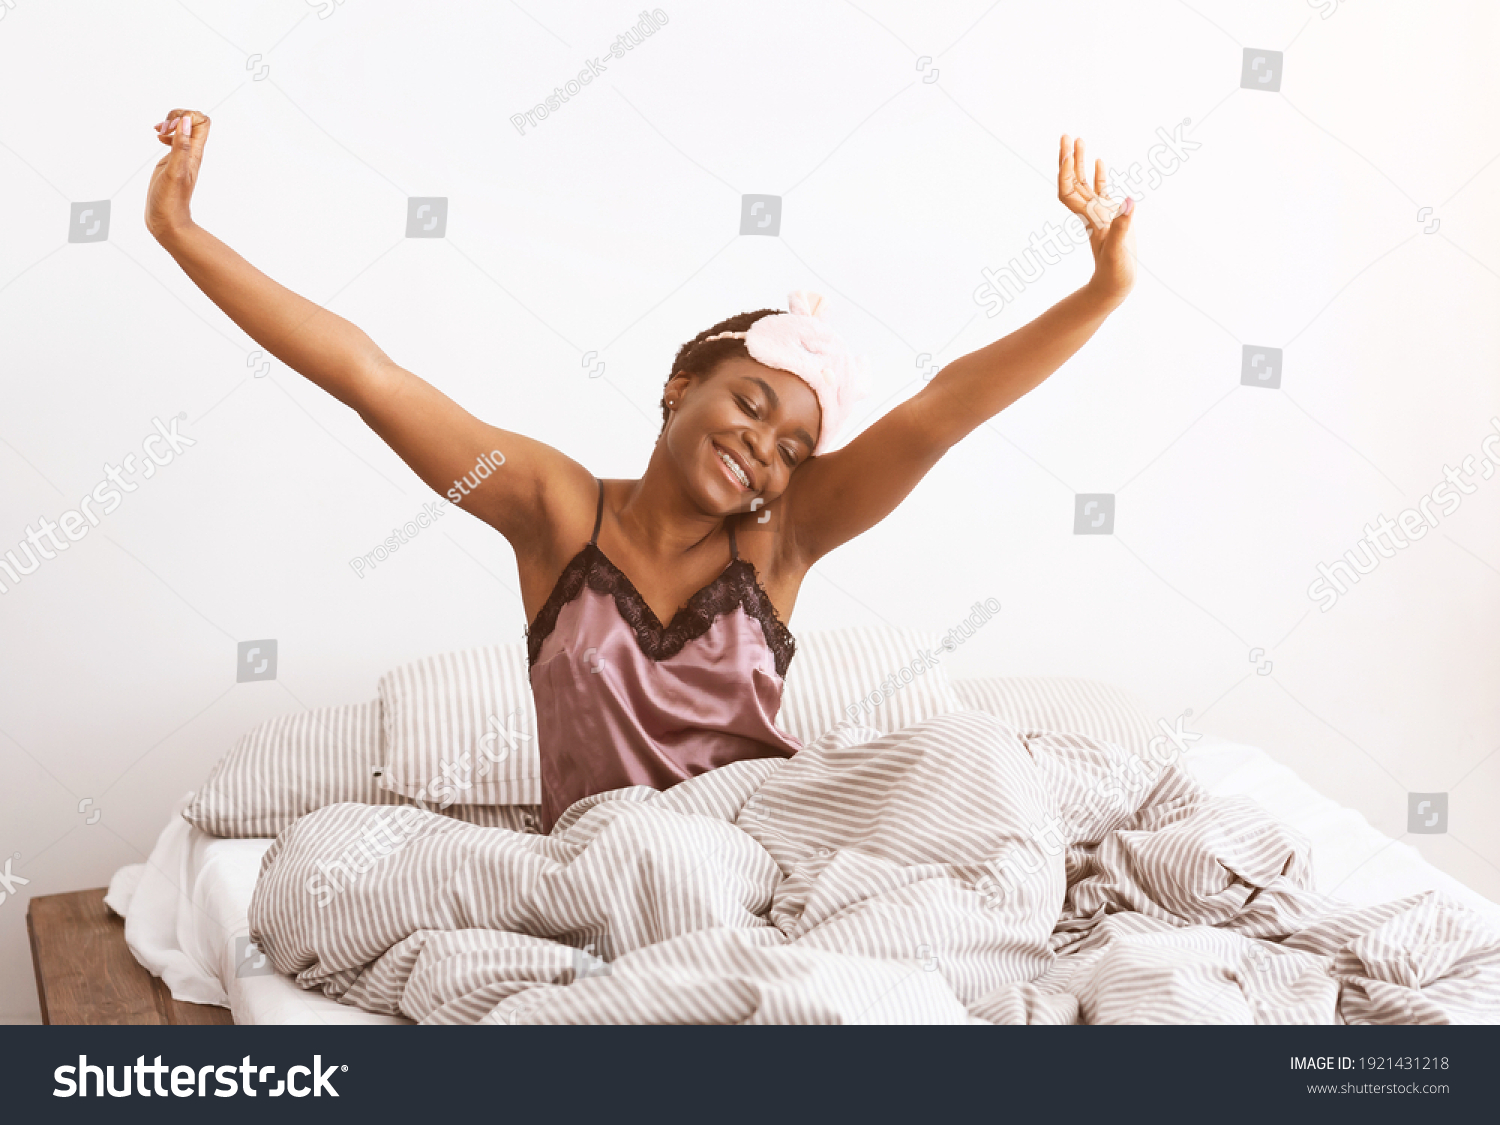 Happy and relaxed after good night sleep. Smiling millennial african american cute woman in mask sits on bed with blanket, stretching after waking up, in bedroom interior, copy space, lens flare #1921431218